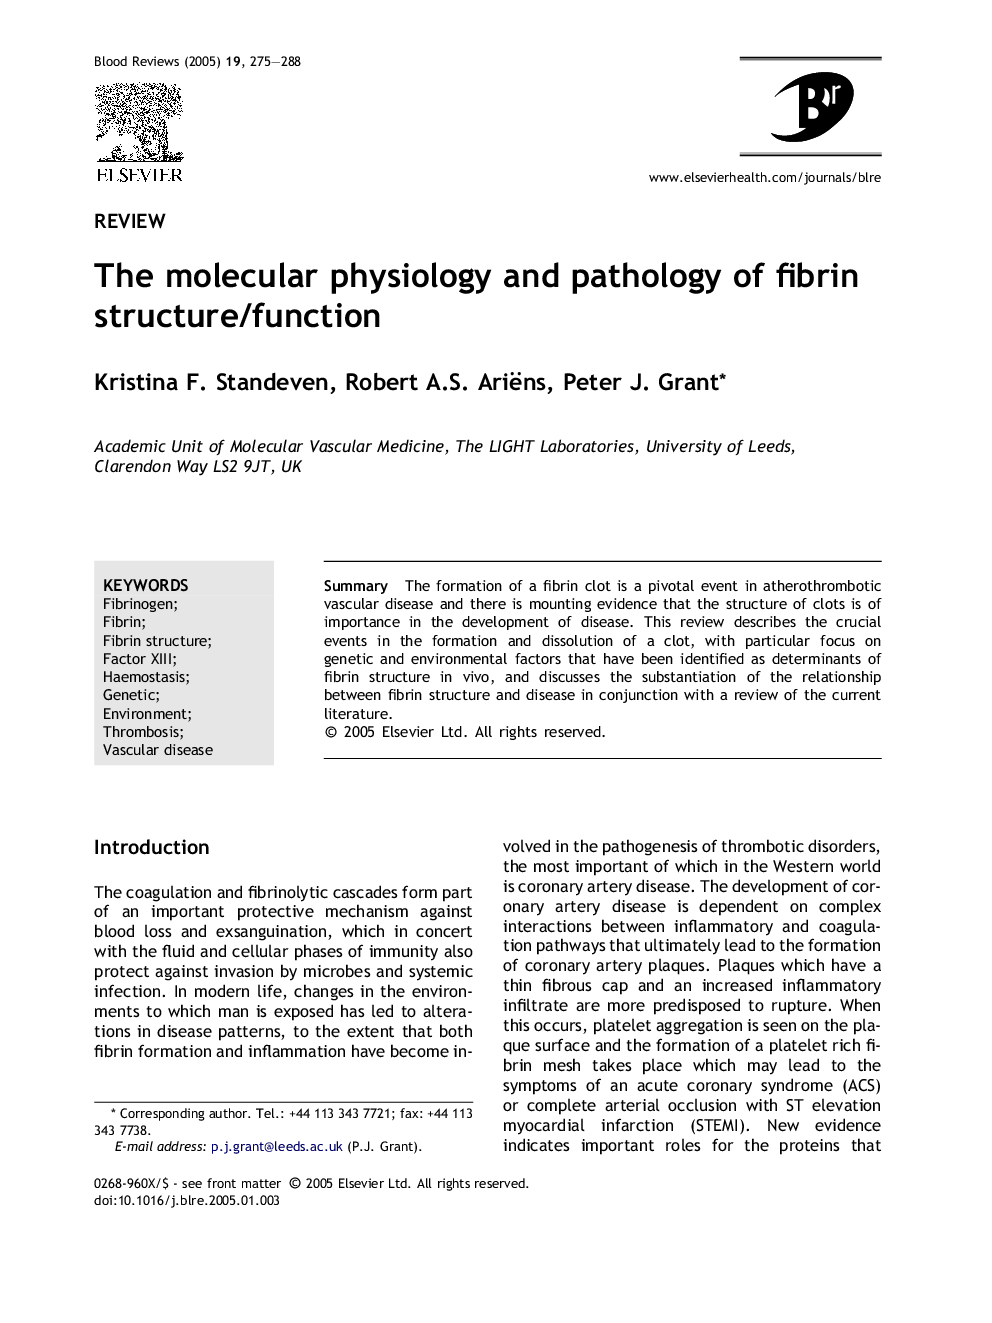 The molecular physiology and pathology of fibrin structure/function